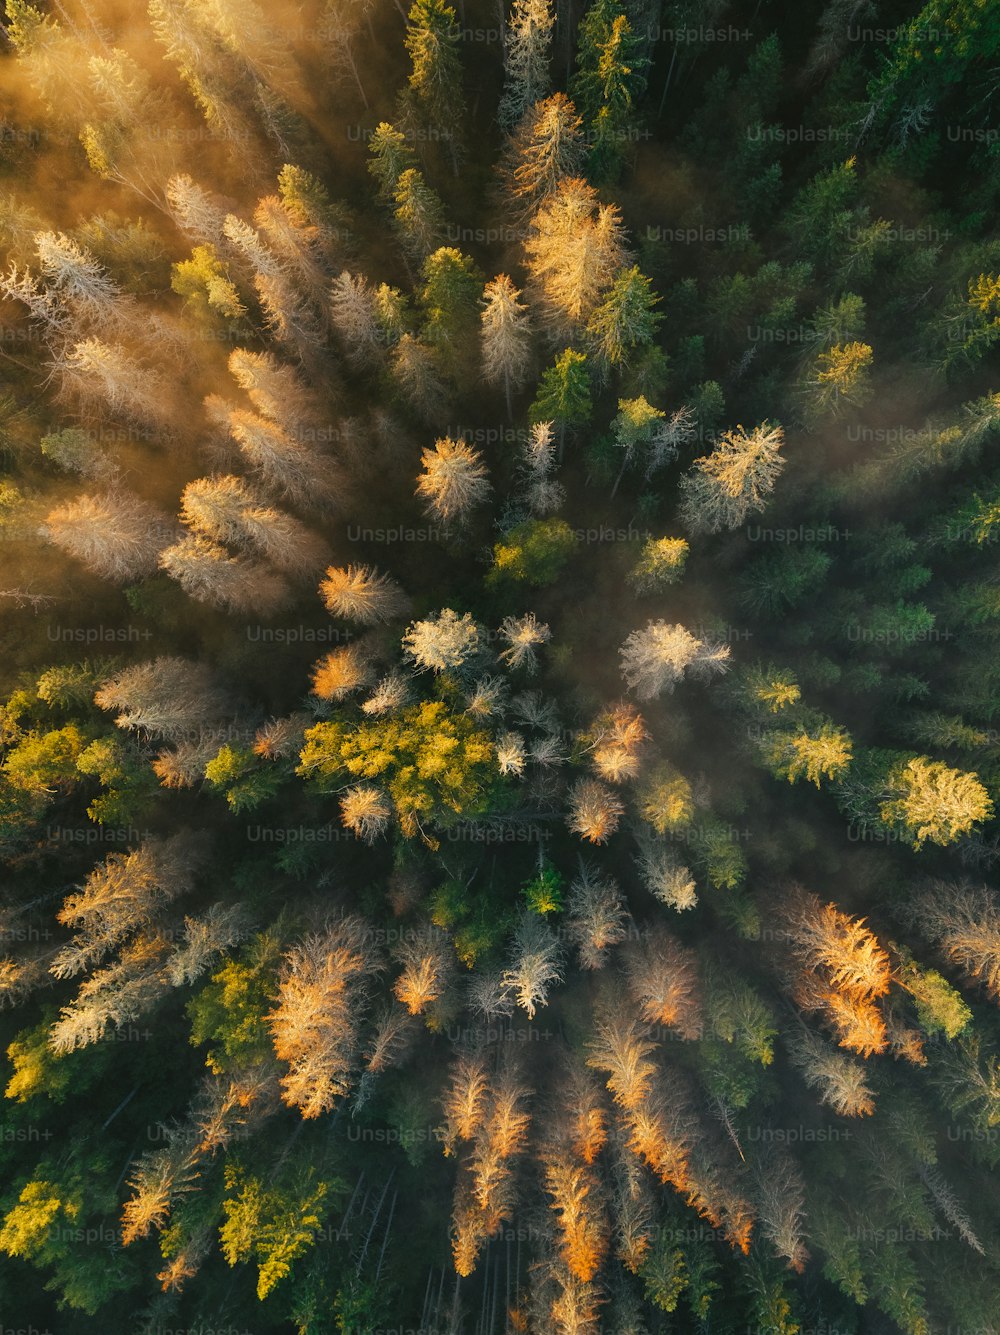 an aerial view of a forest with a lot of trees